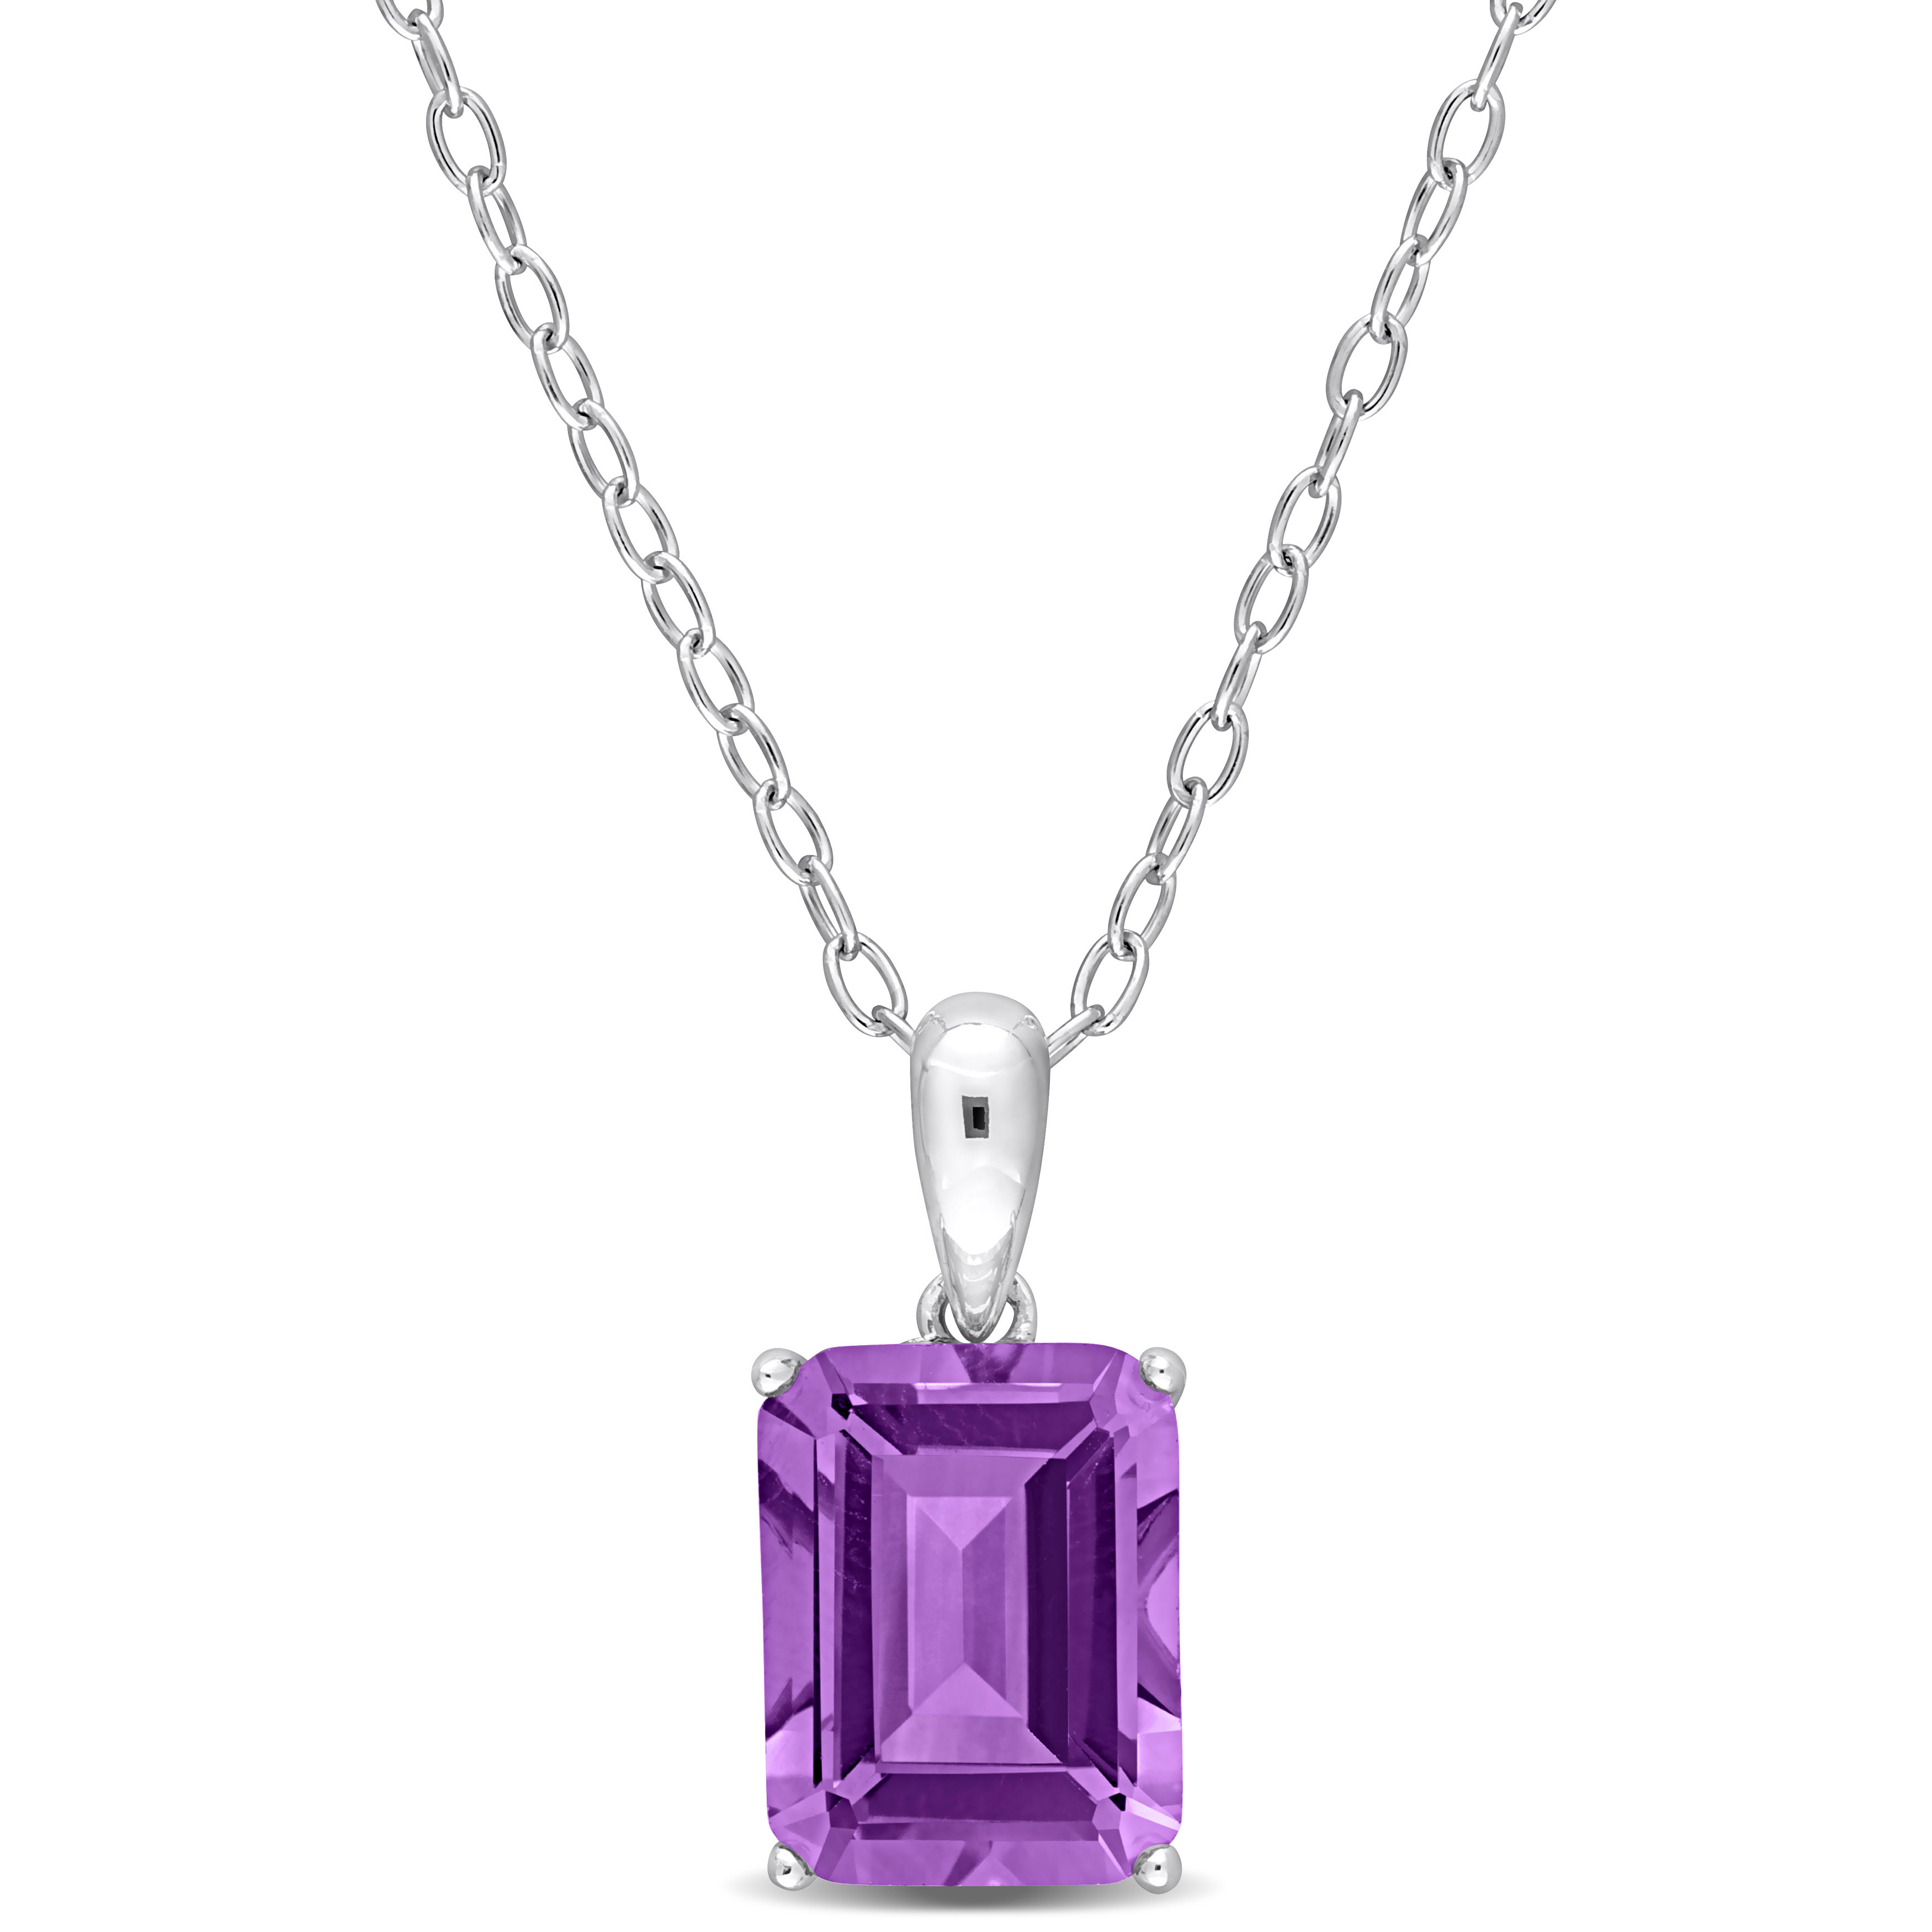 2 1/5 CT TGW Emerald Cut Amethyst Solitaire Heart Design Pendant with Chain in Sterling Silver - 18 in.